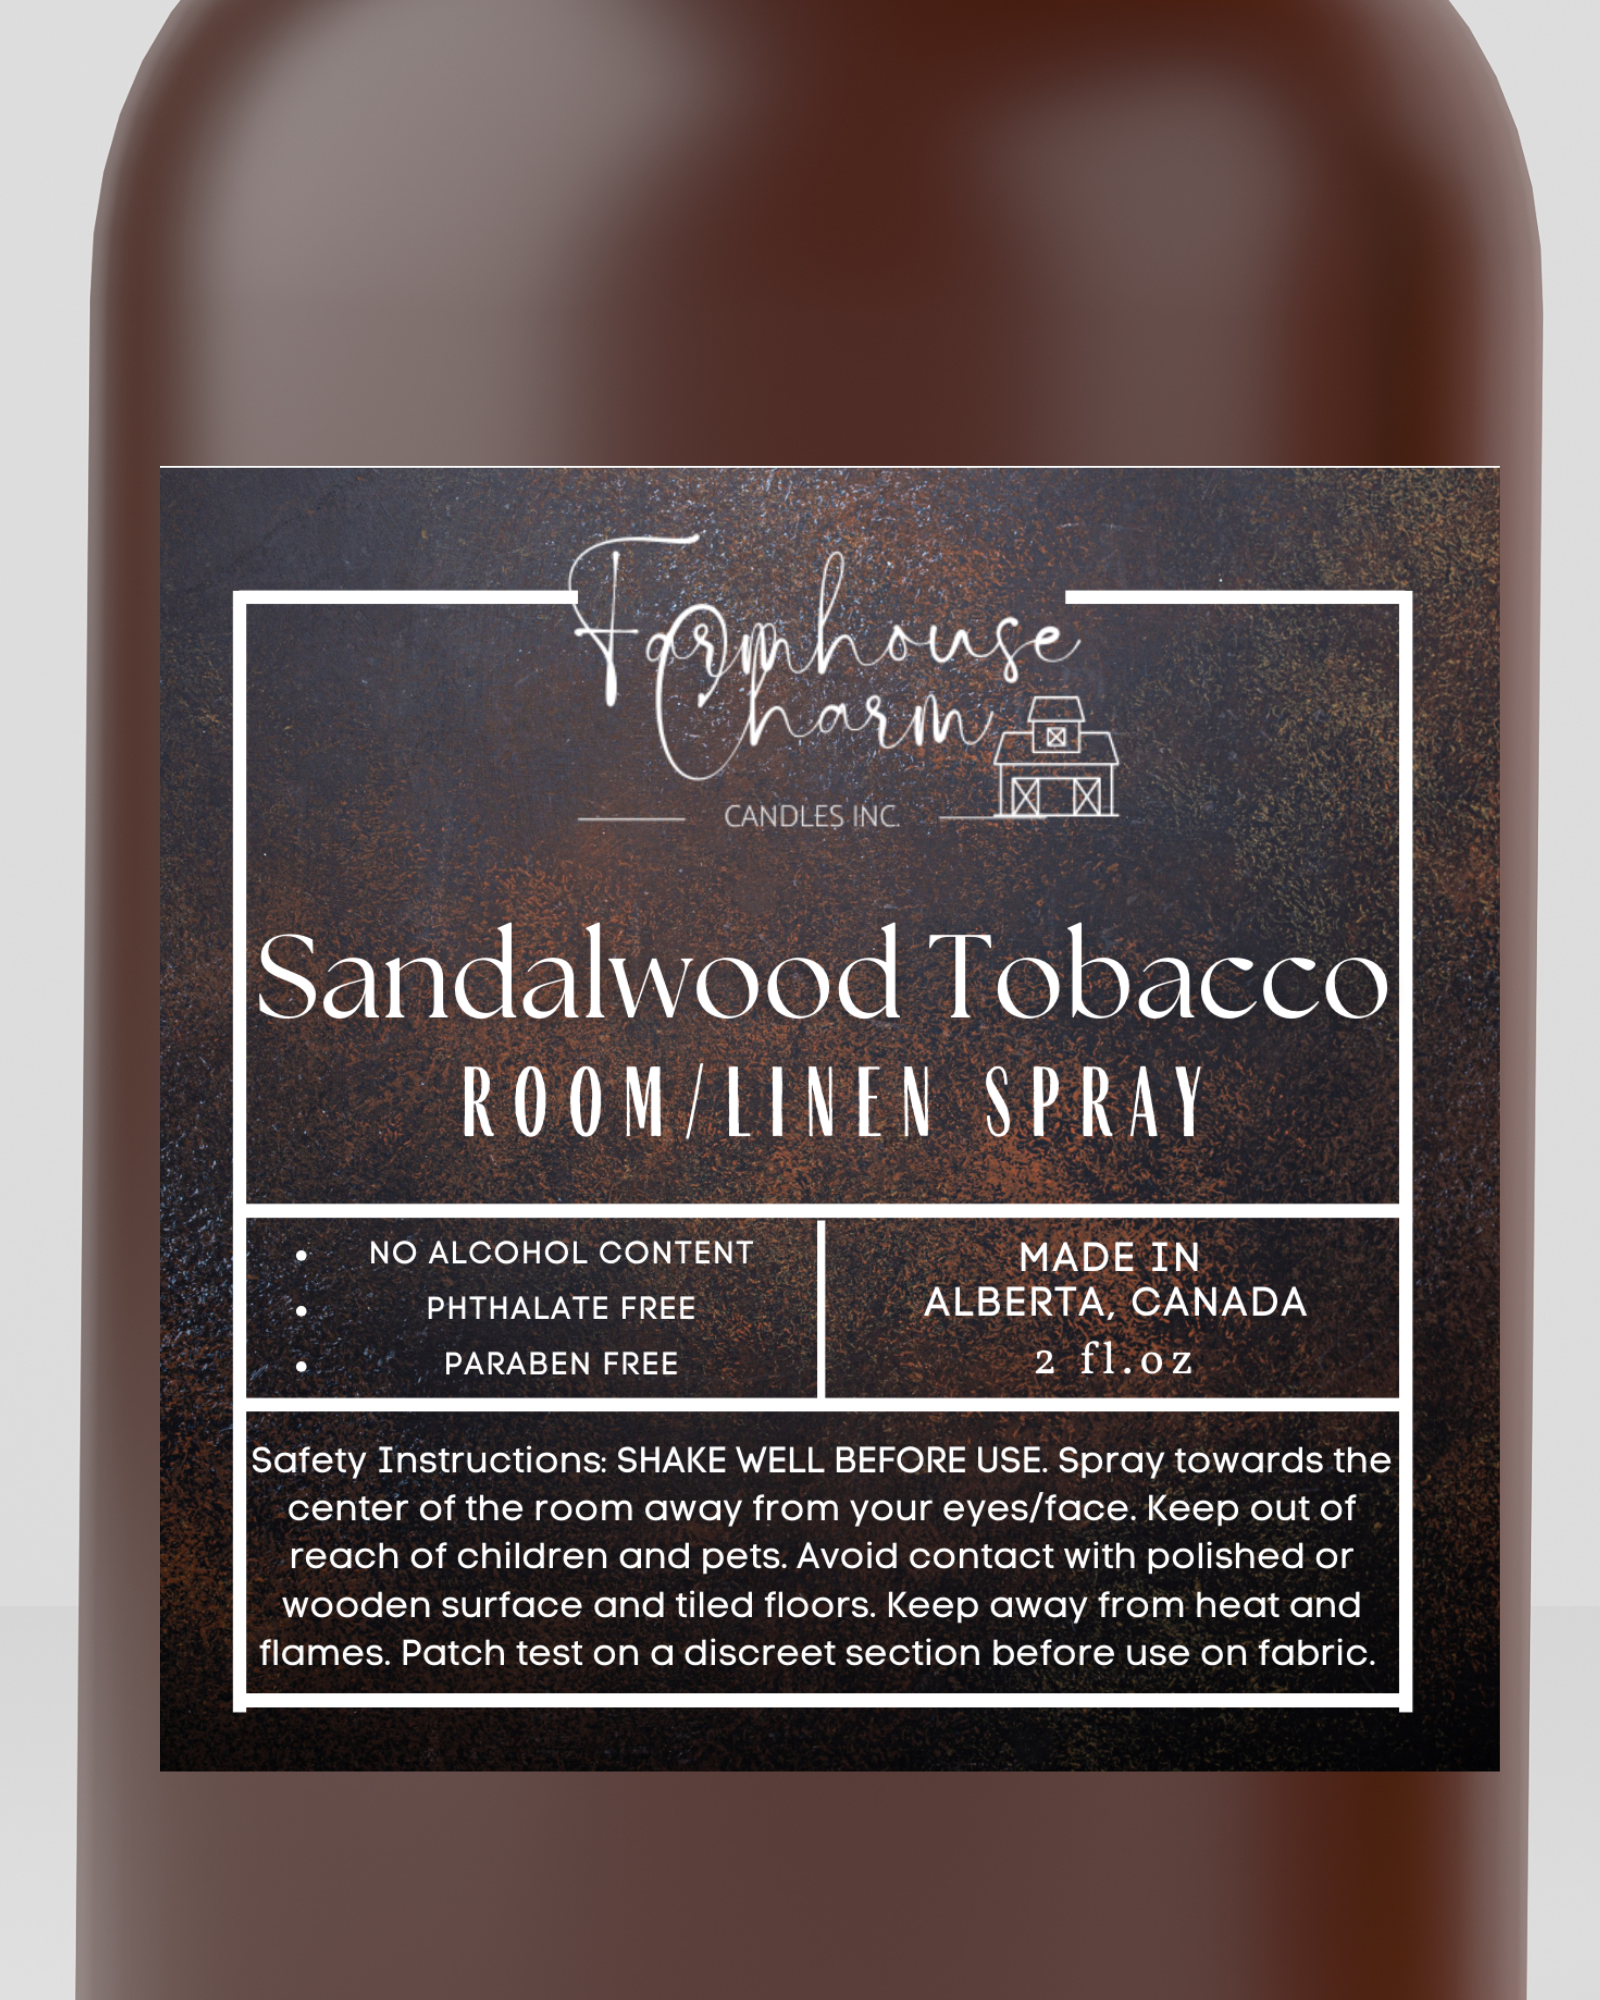 Sandalwood Tobacco Room and Linen Spray is truly a unique and captivating scent that is sure to please anyone looking for a warm and cozy aroma. The combination of tobacco leaf and cedar creates a deep, musky scent that is both luxurious and masculine. The addition of sandalwood adds a touch of sweetness to the blend, while the soft moss finish brings a subtle earthiness to the overall aroma.